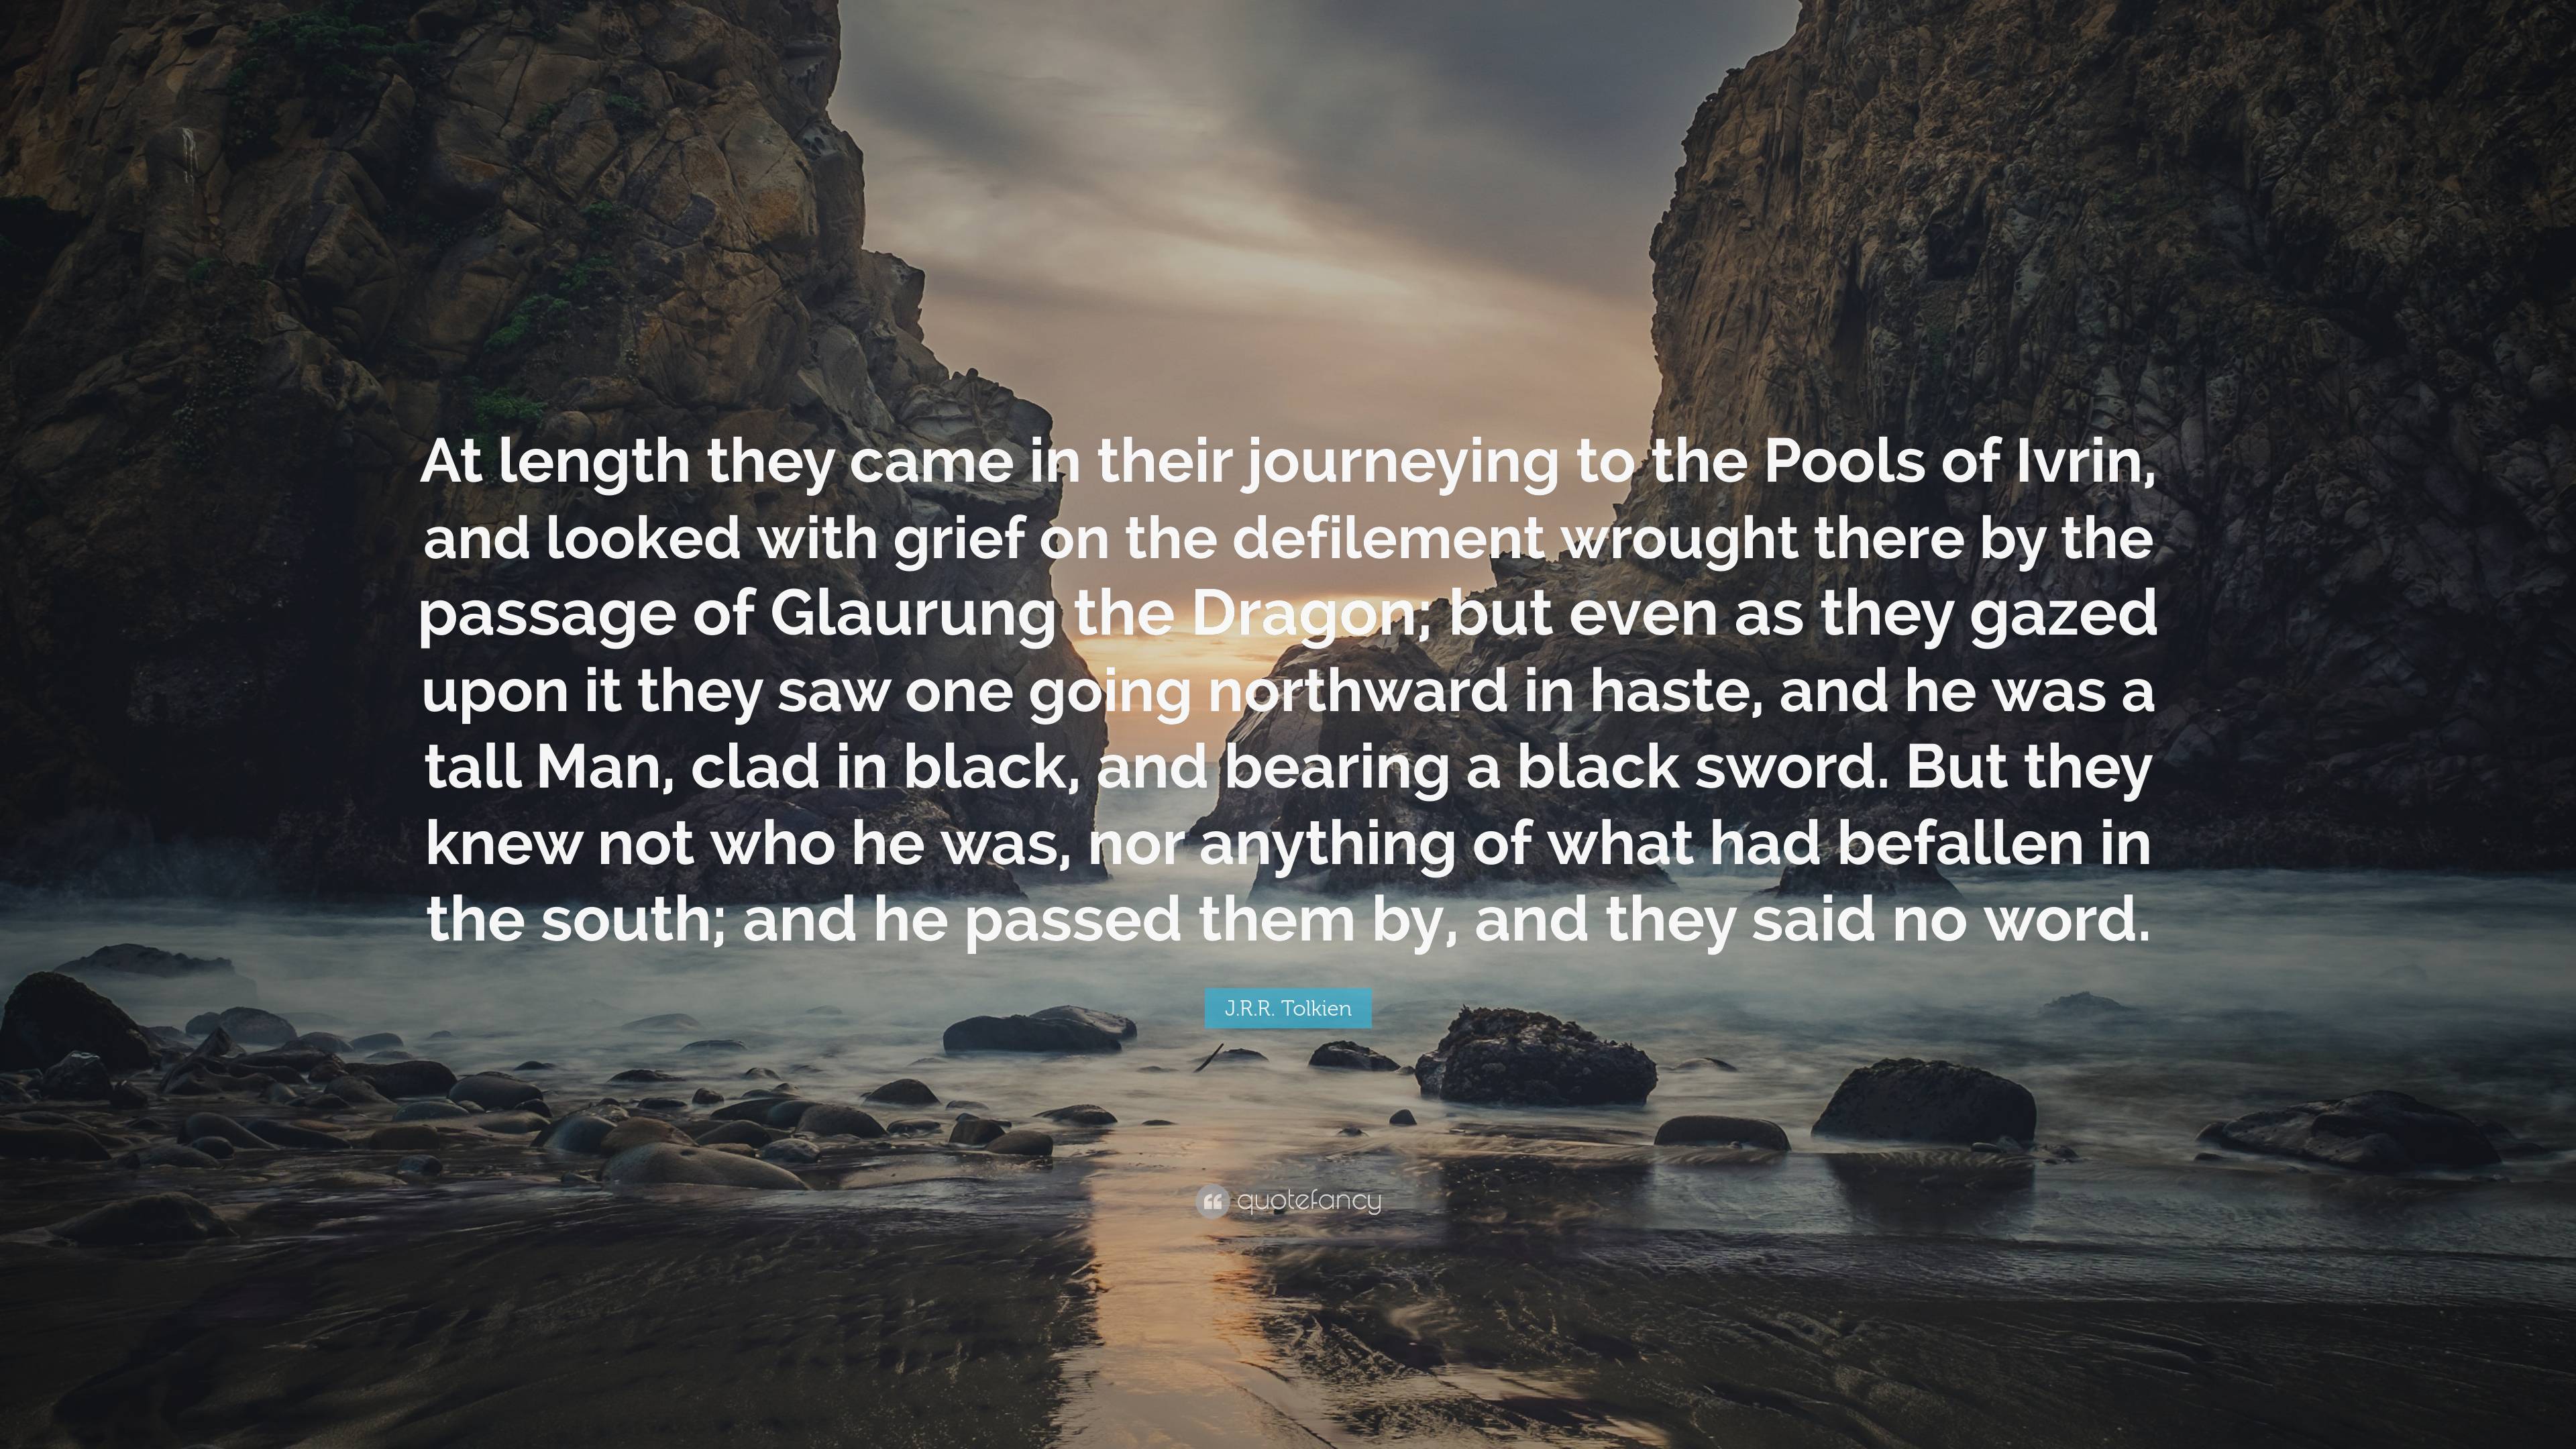 J.R.R. Tolkien Quote: “At length they came in their journeying to the Pools  of Ivrin, and looked with grief on the defilement wrought there by ”